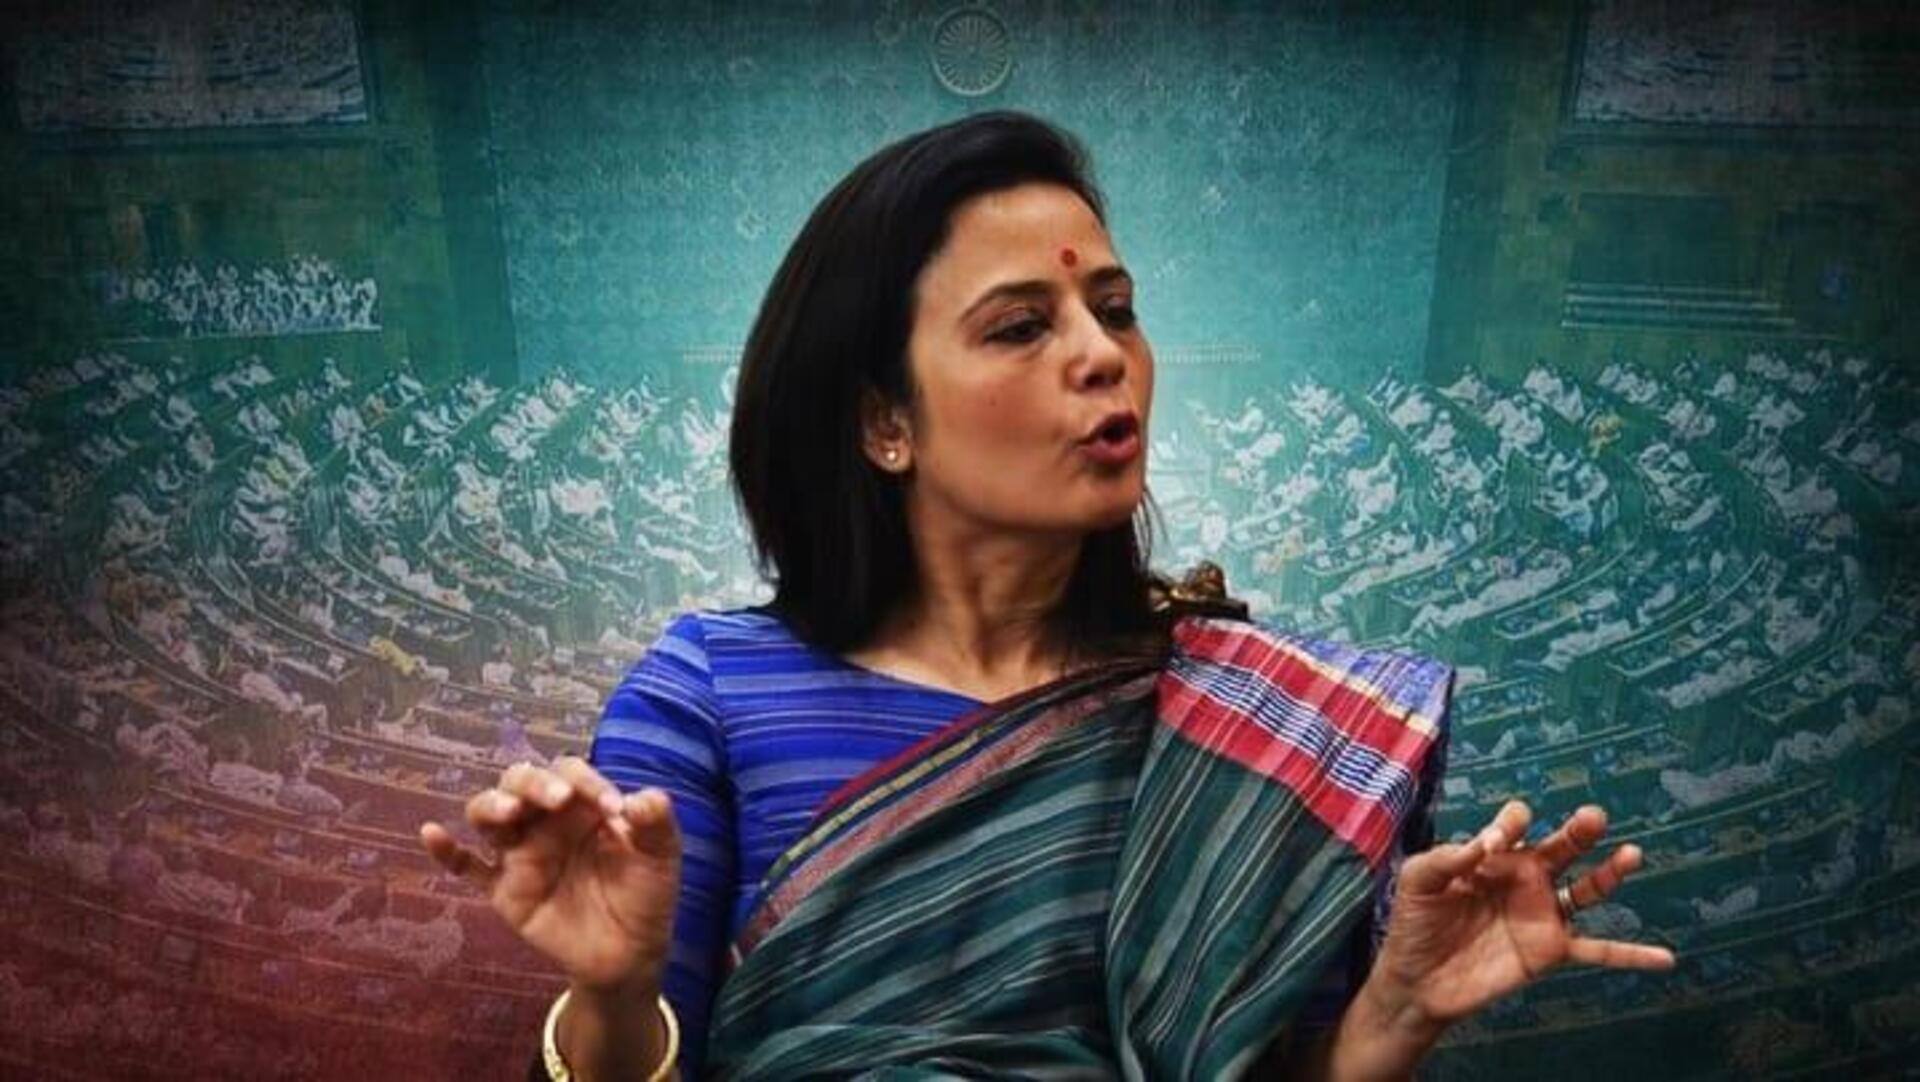 Mahua Moitra gets eviction notice, with 'use of force' warning